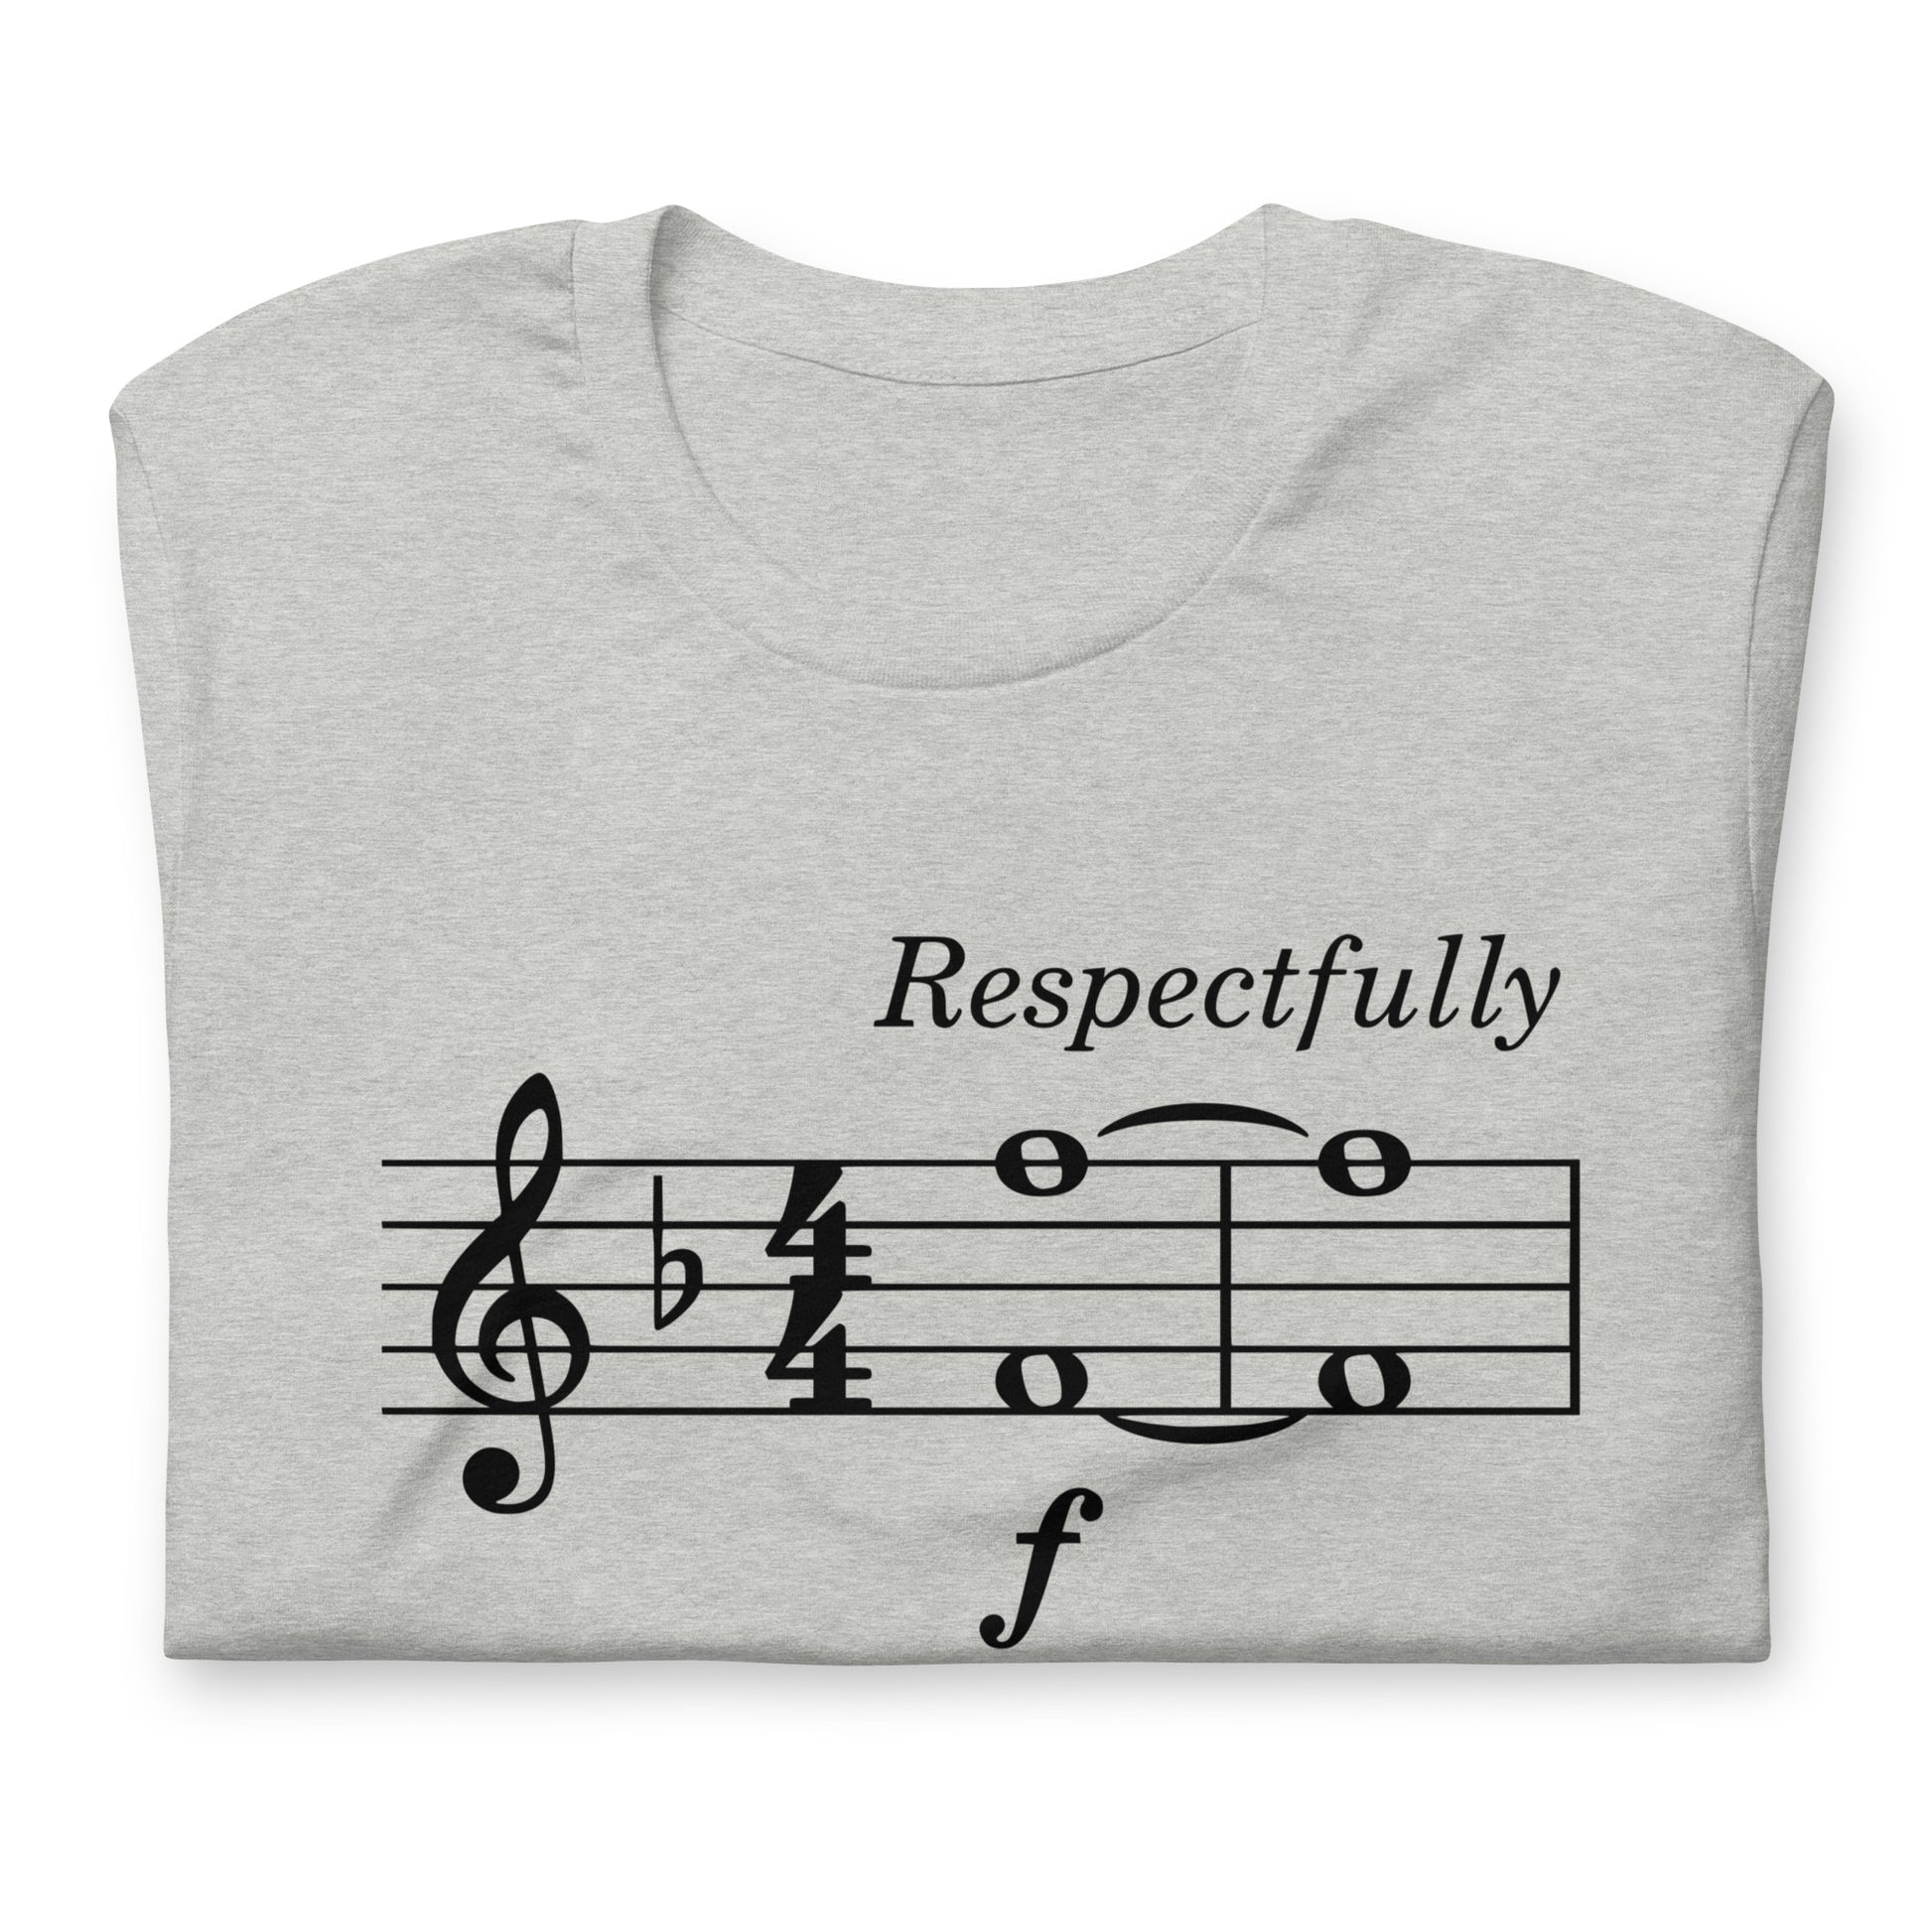 Funny Music Theory Video Game Meme T Shirt: Play F to Pay Respect - Grey Heather